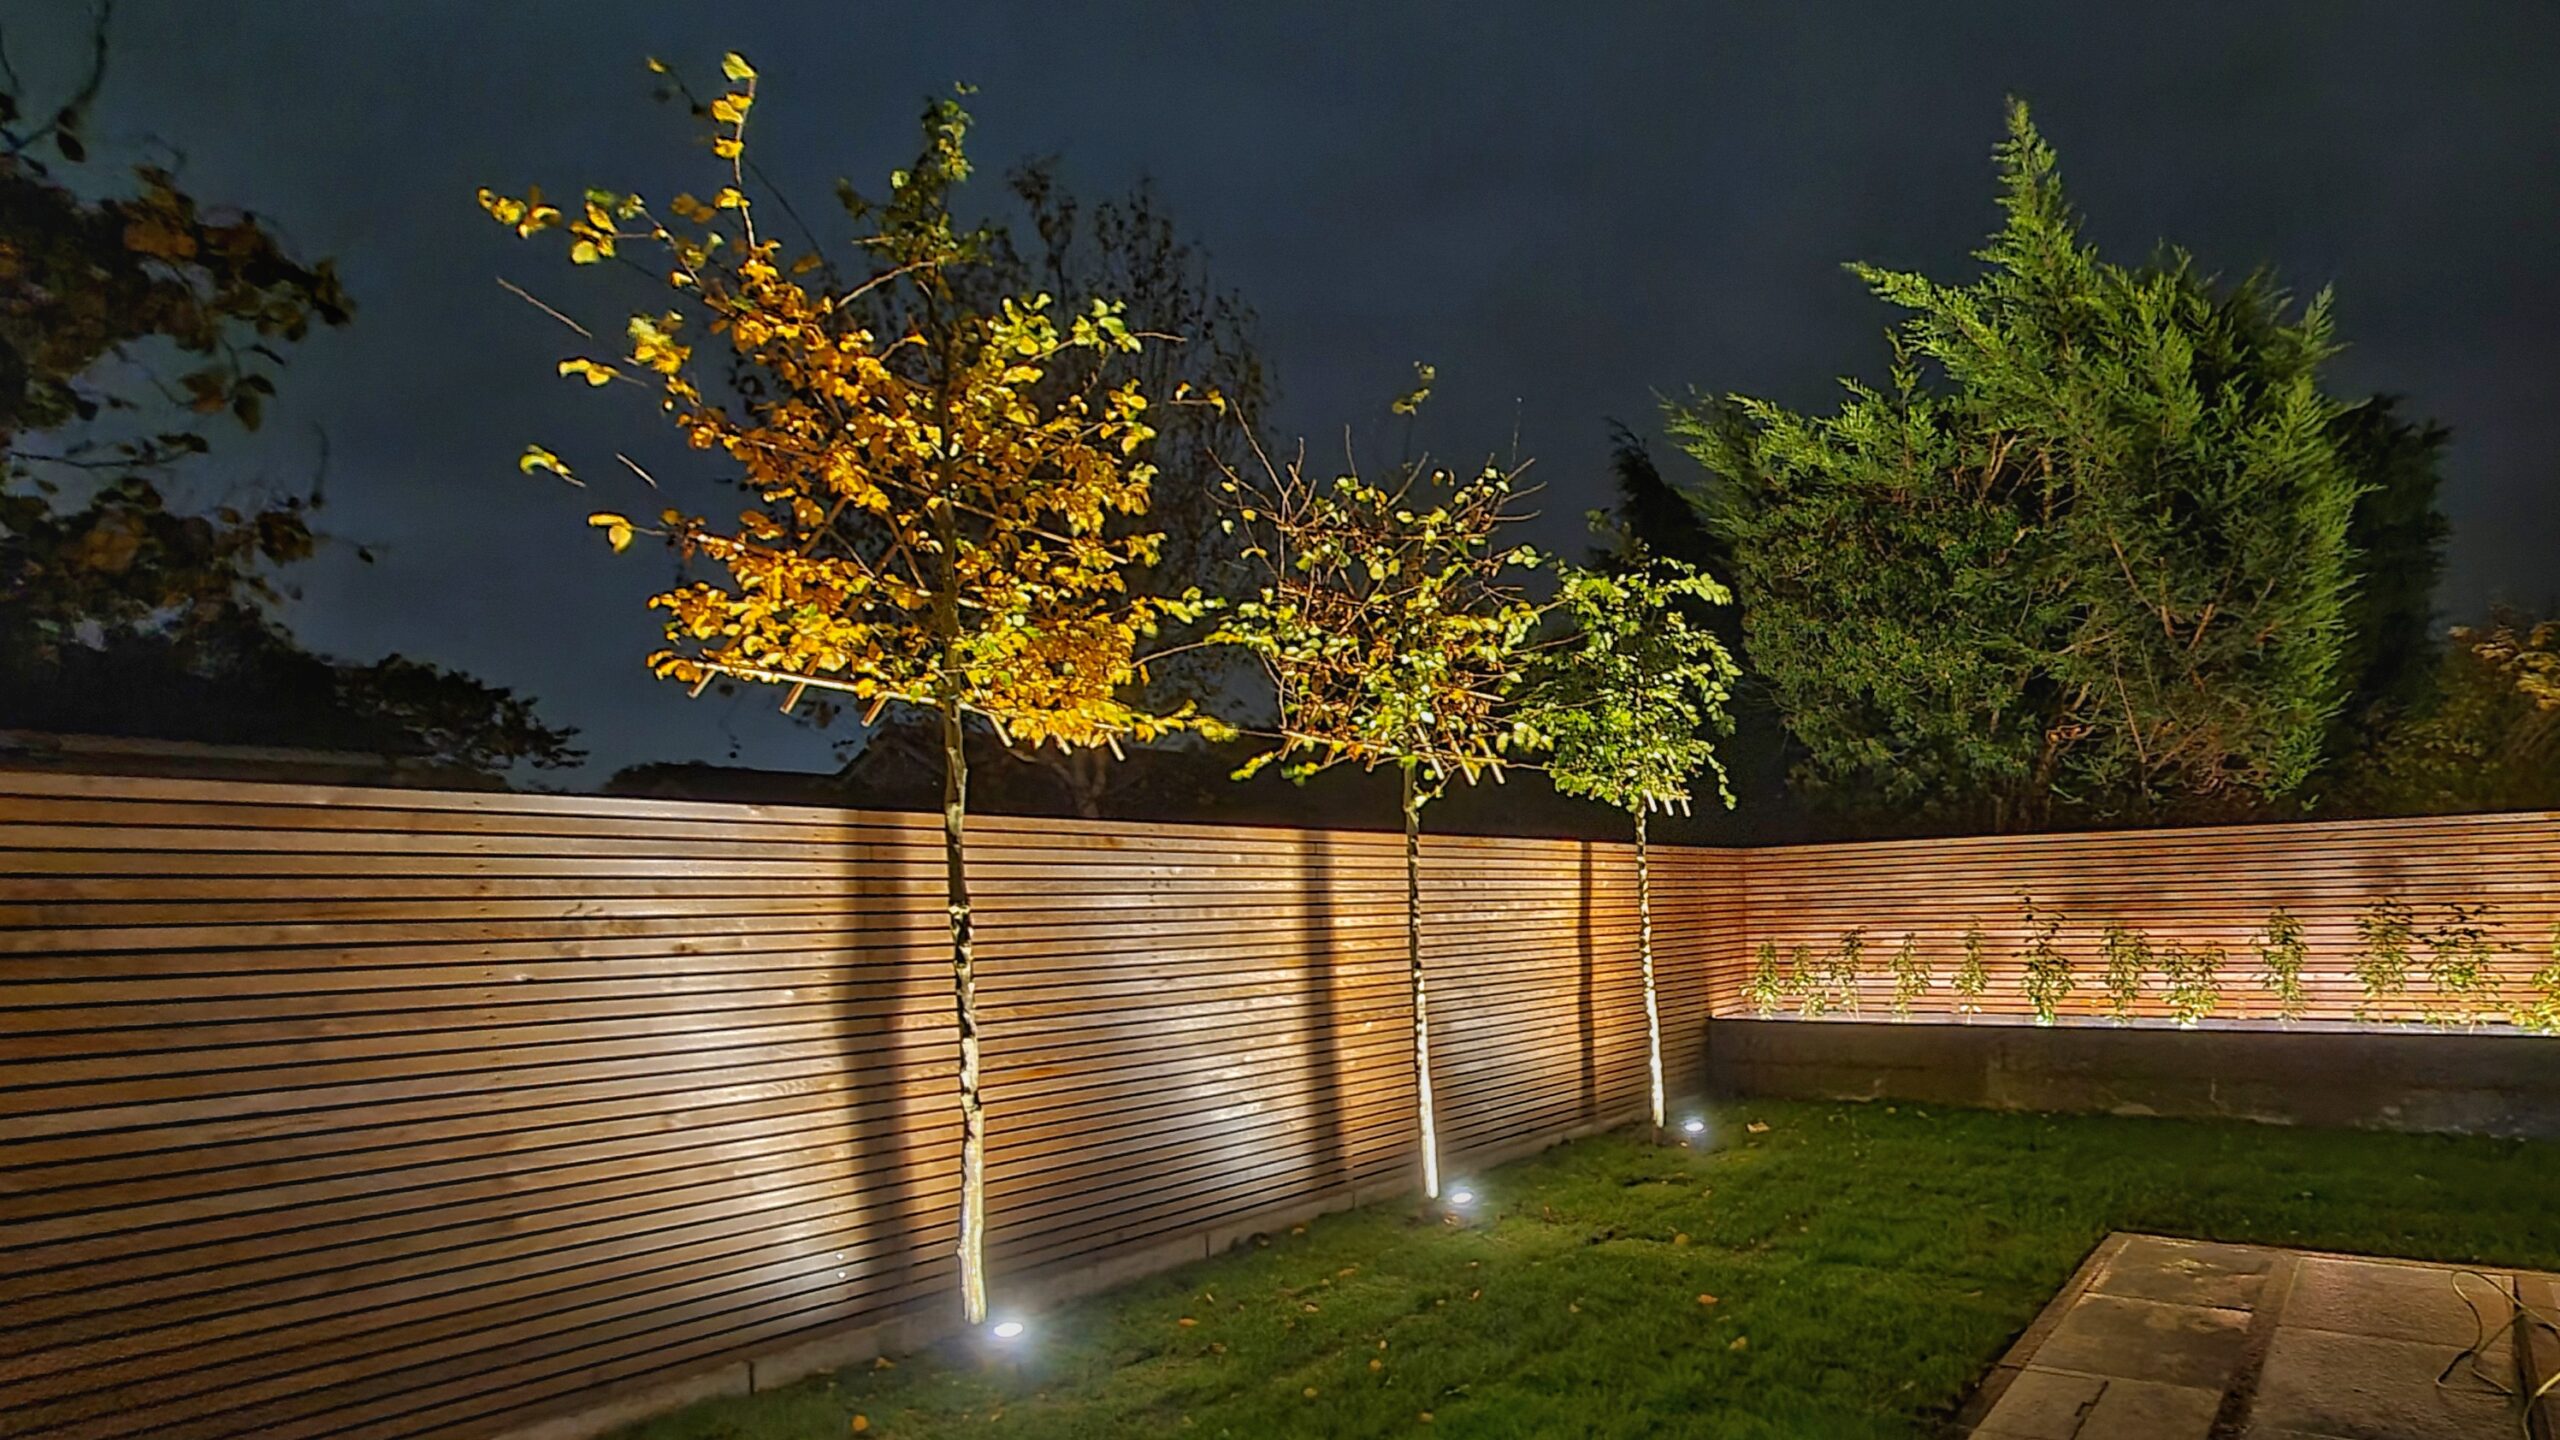 Pleached beech trees lit up at night against a cedar fence.